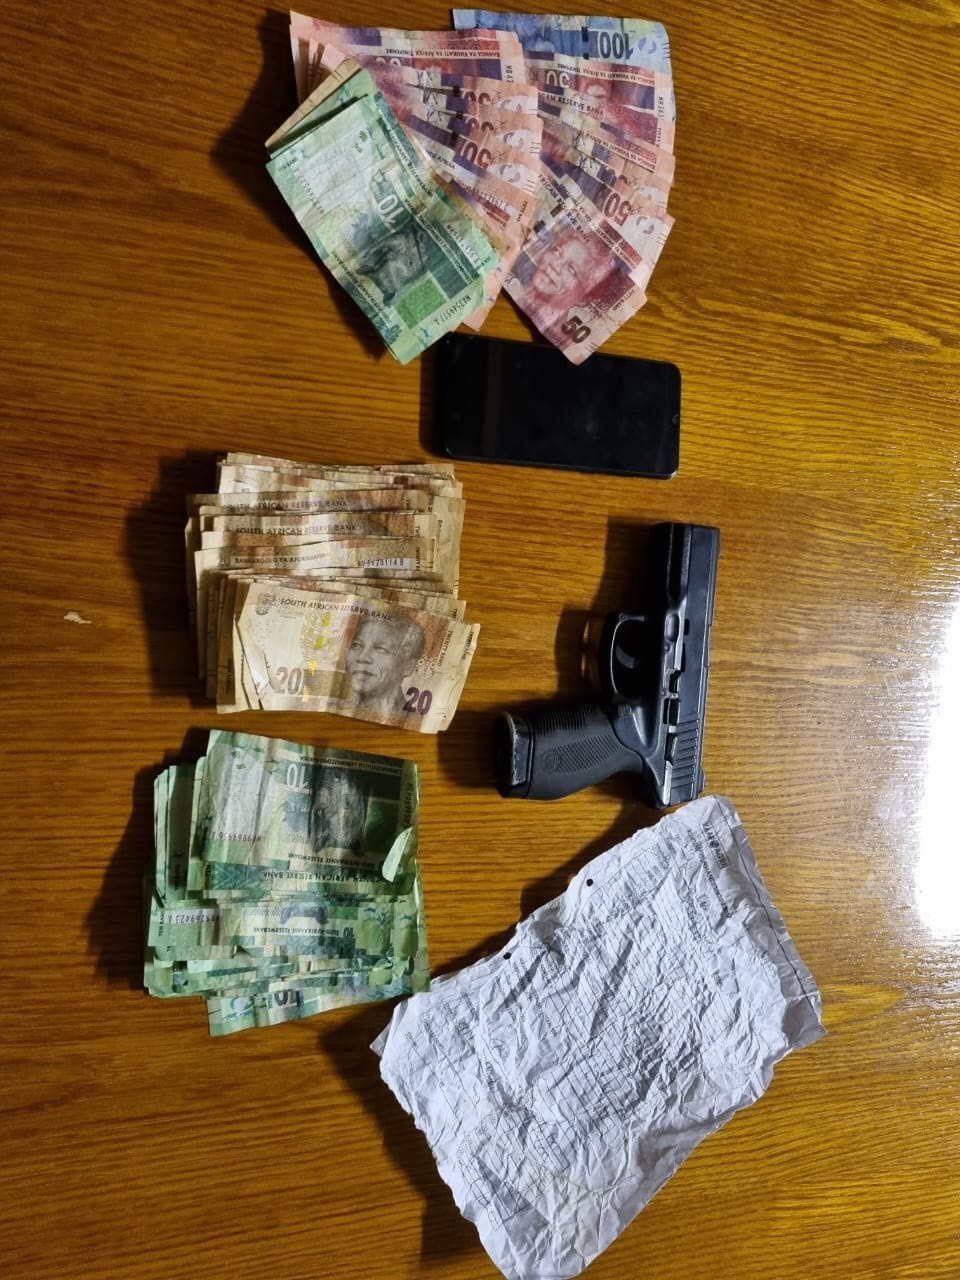 Police arrest suspects shortly after business robbery